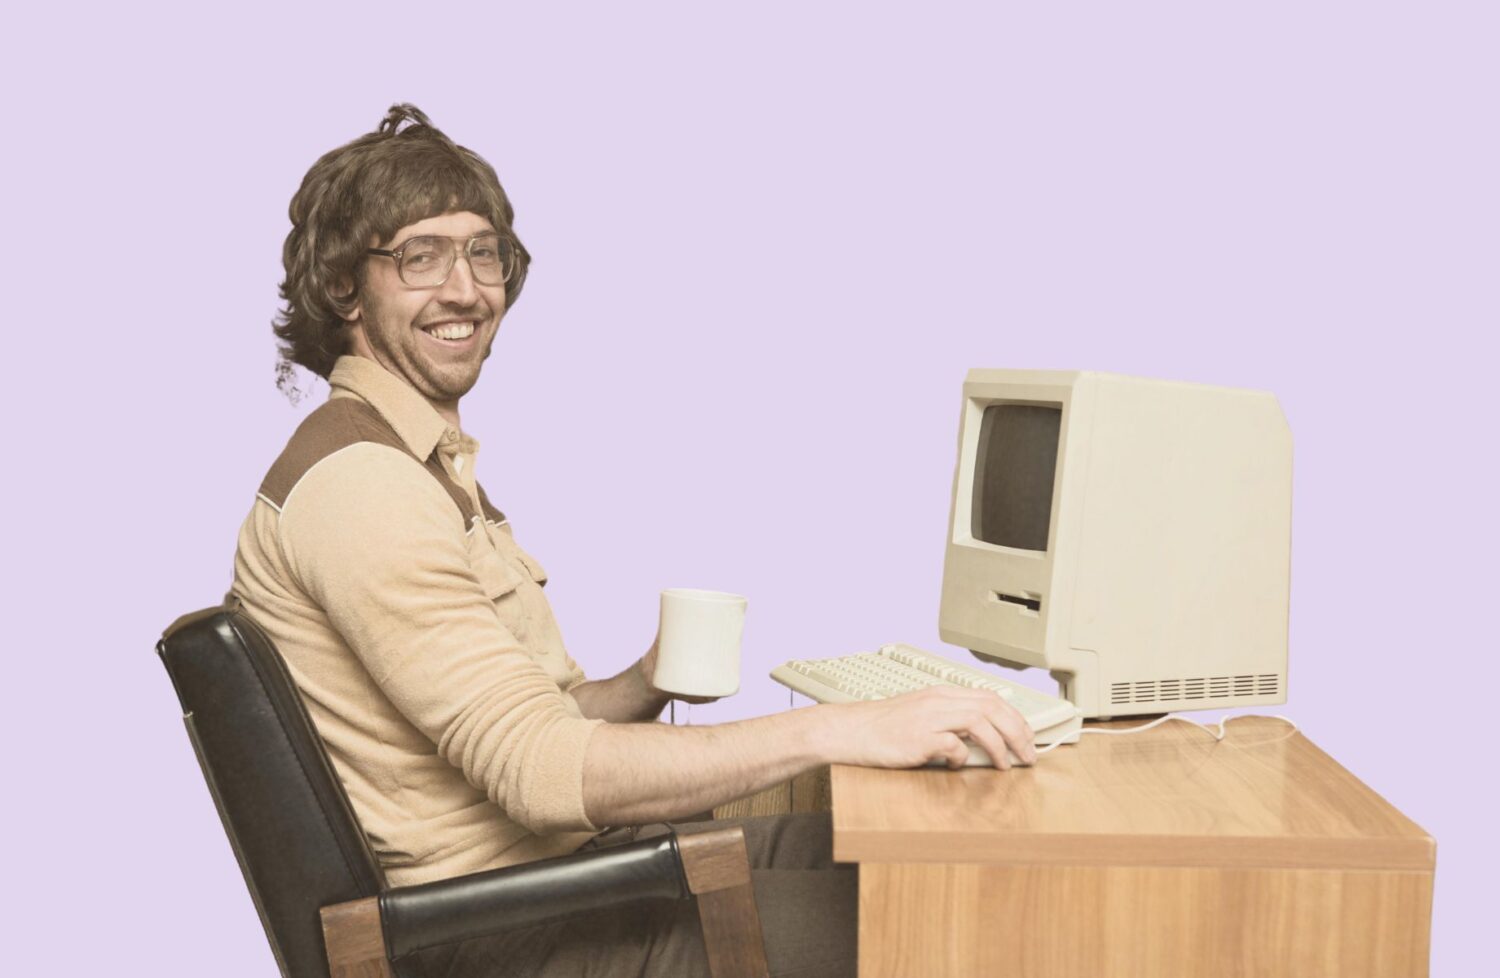 1980s man with the first Mac